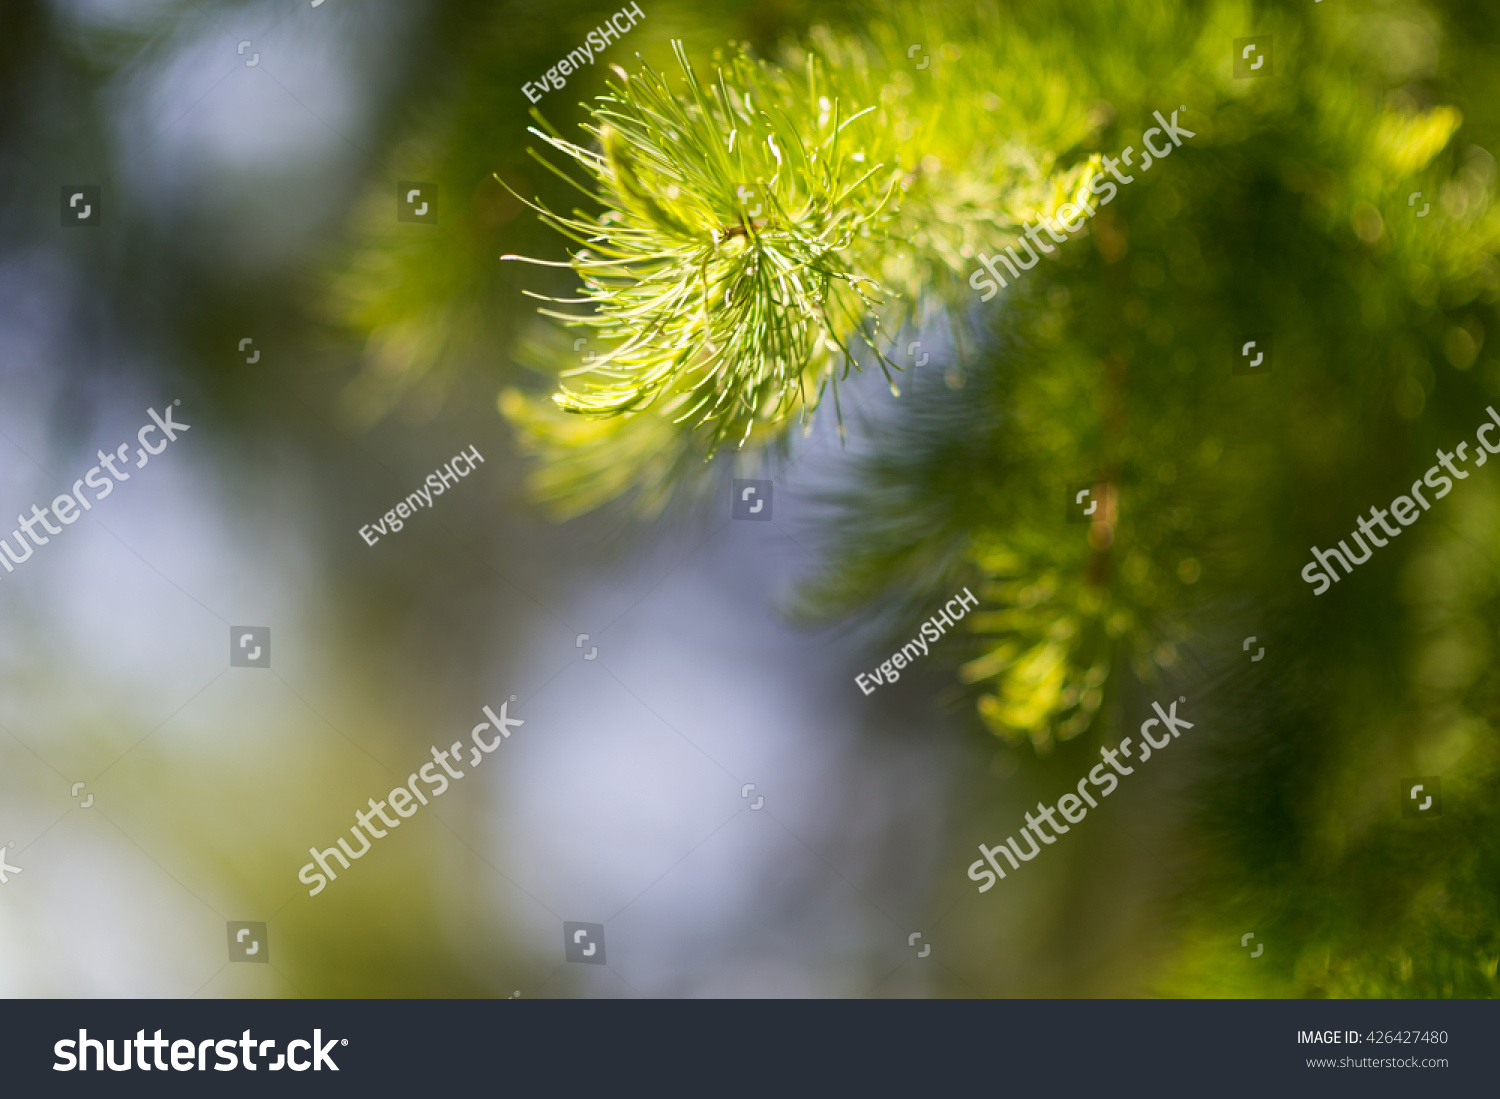 Nature background of sunny pine tree needles on branch at summer or spring day.  #426427480